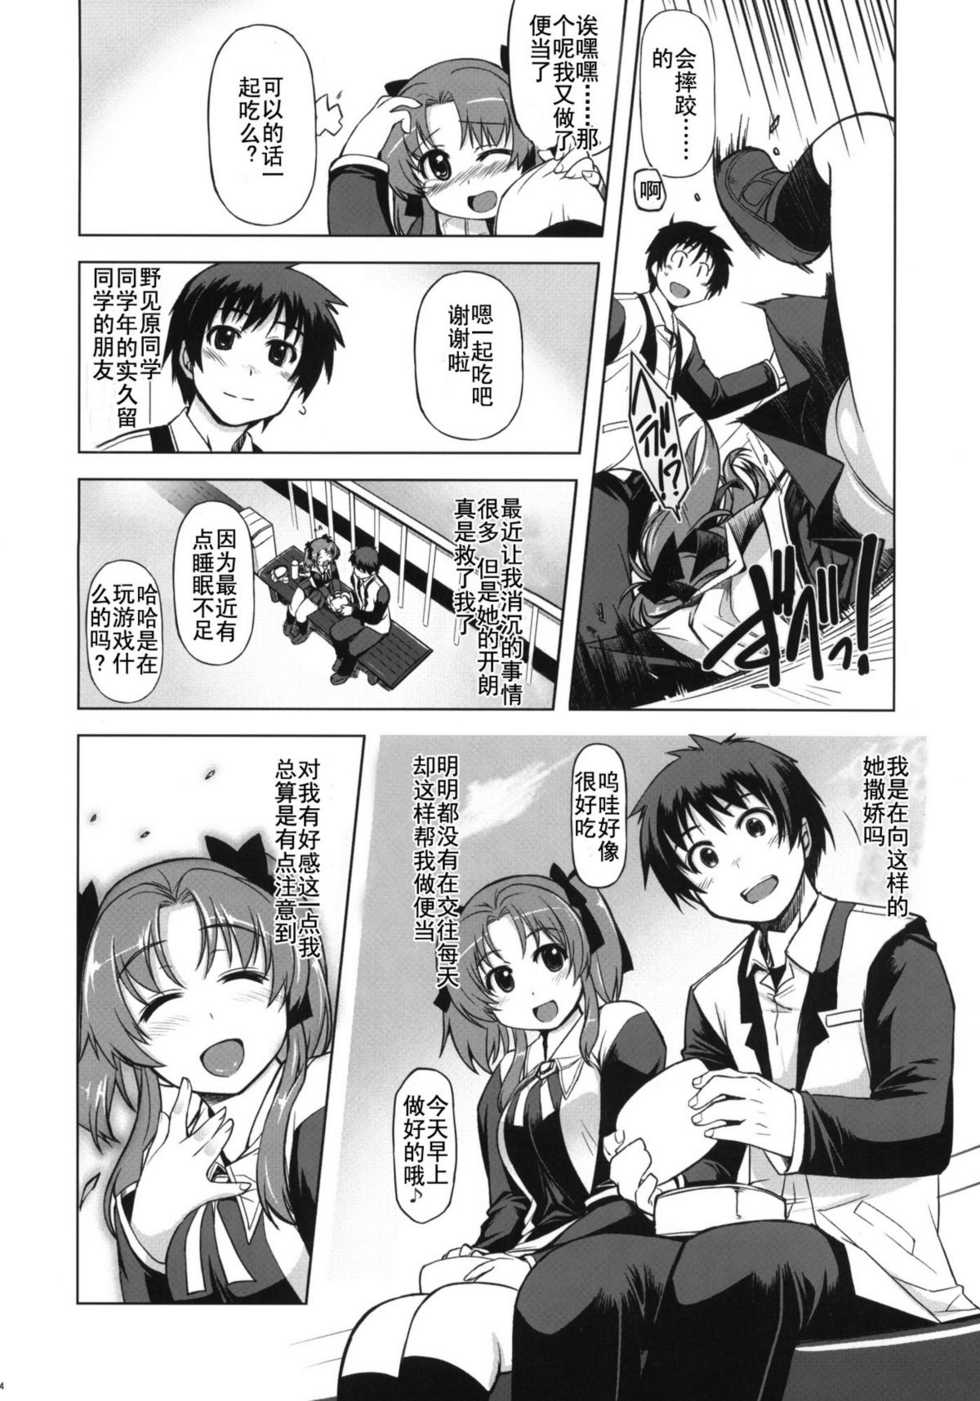 (C81) [Xration (mil)] MIXED-REAL 4 (Zeroin) [Chinese] [渣渣汉化组] - Page 4